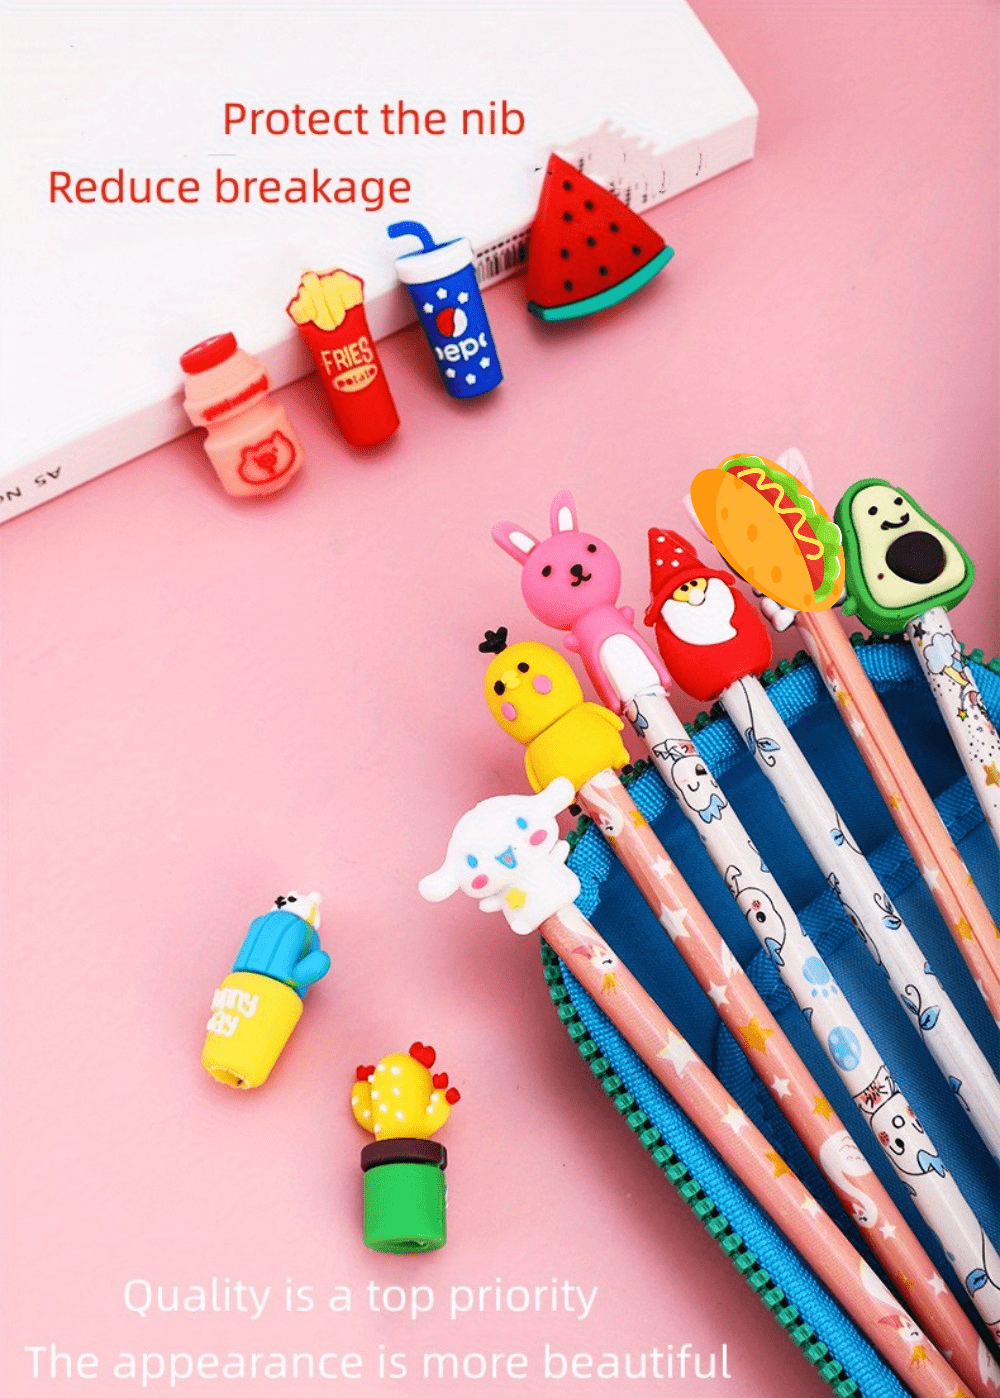 Cute Carrot Pencil Case Set - Pack of 10pcs,Large Capacity Soft Silicone Carrot  Pen Pouch,Gel Ink Pen,Mechanical Pencil,Eraser,Lead Refills for Cute School  Supplies/Stationery Kids Students Waterproof : : Home & Kitchen